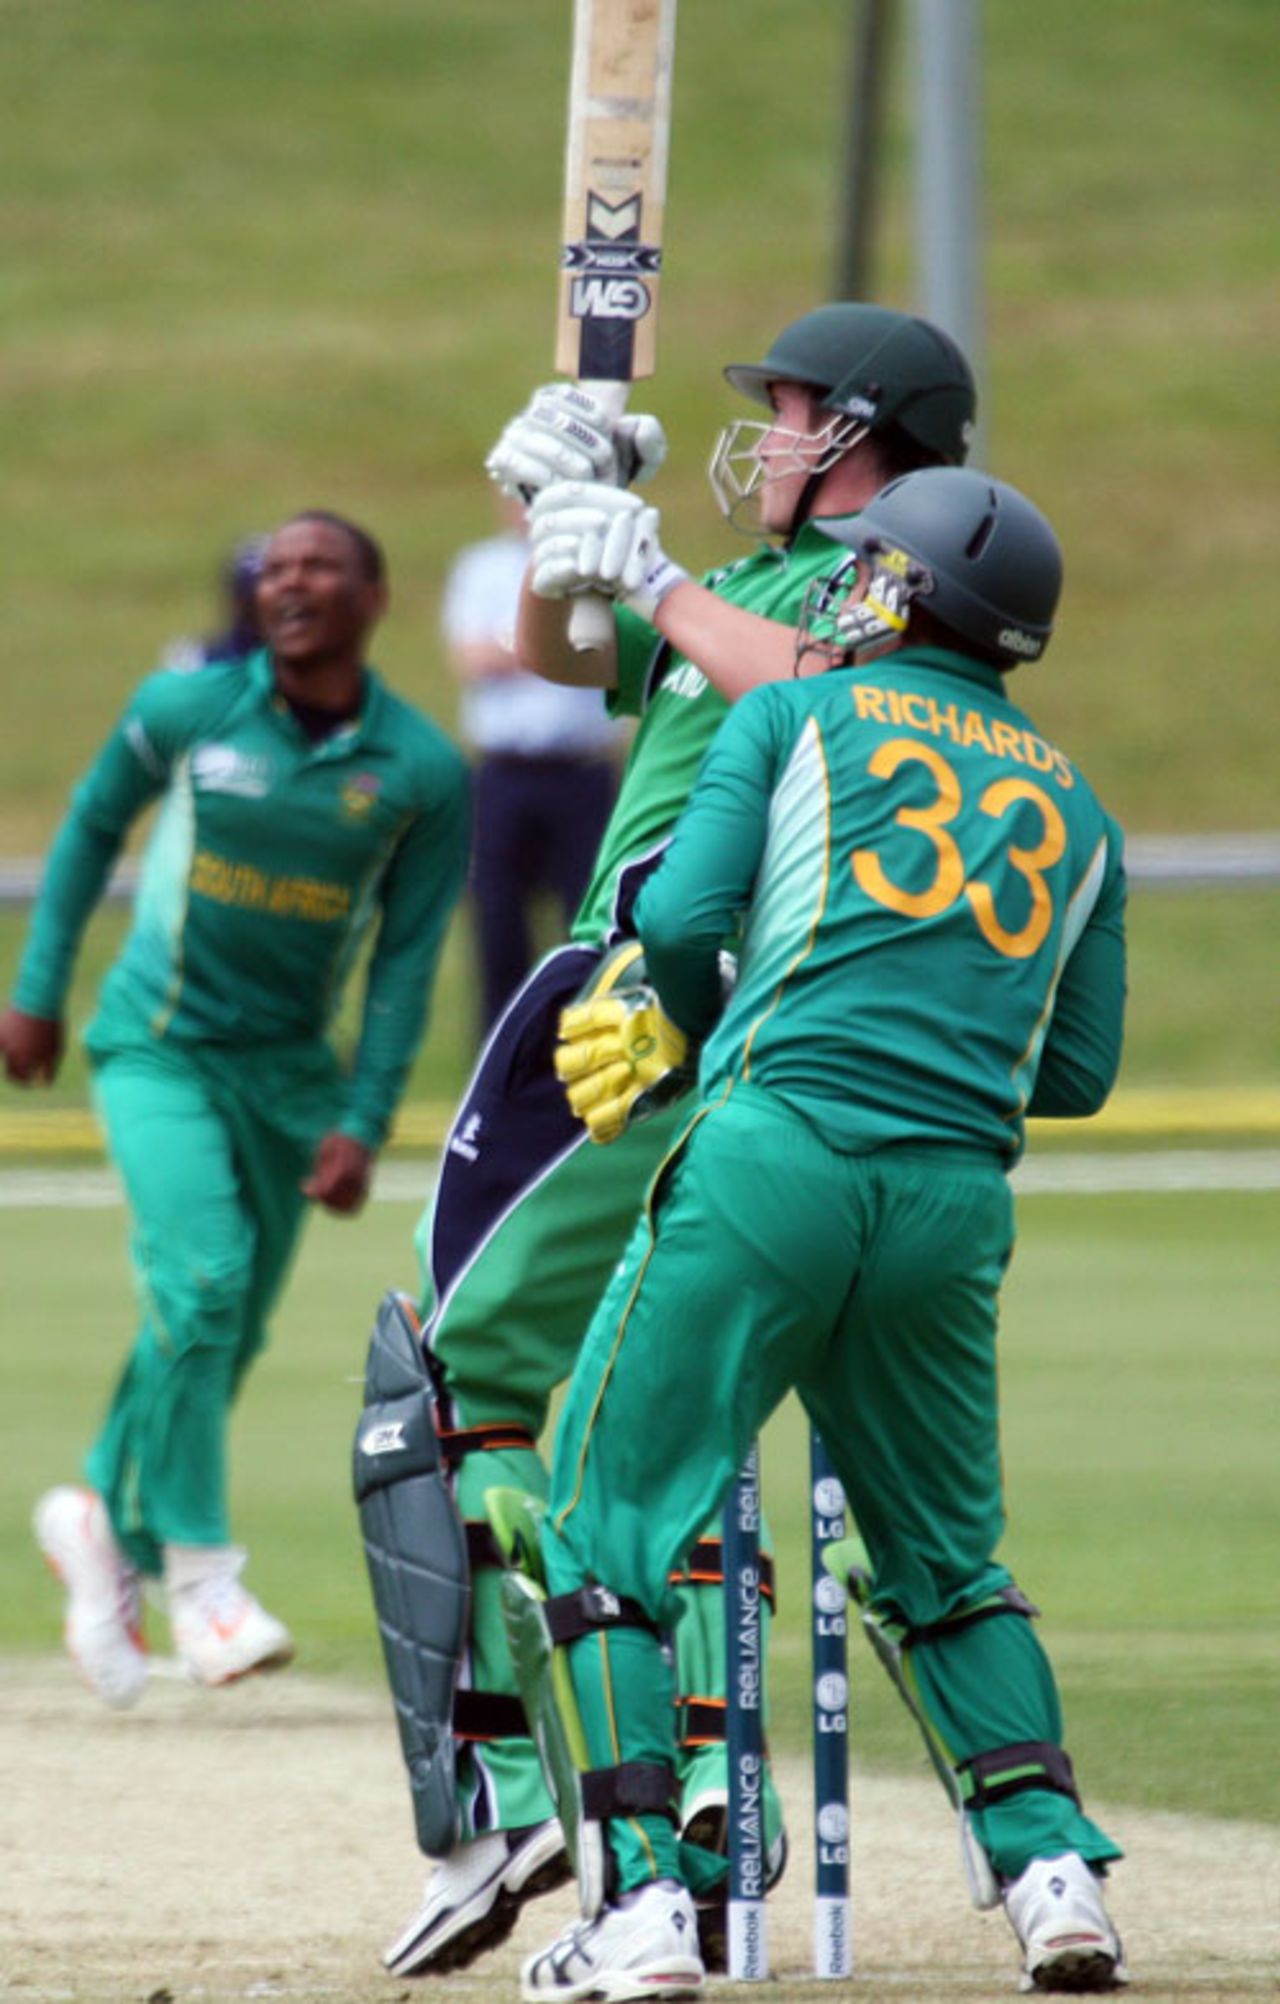 Lee Nelson hits a six during his half century,  Ireland Under-19s v South Africa Under-19s, 3rd Match, Group B, ICC Under-19 World Cup, Queenstown, January 15, 2009